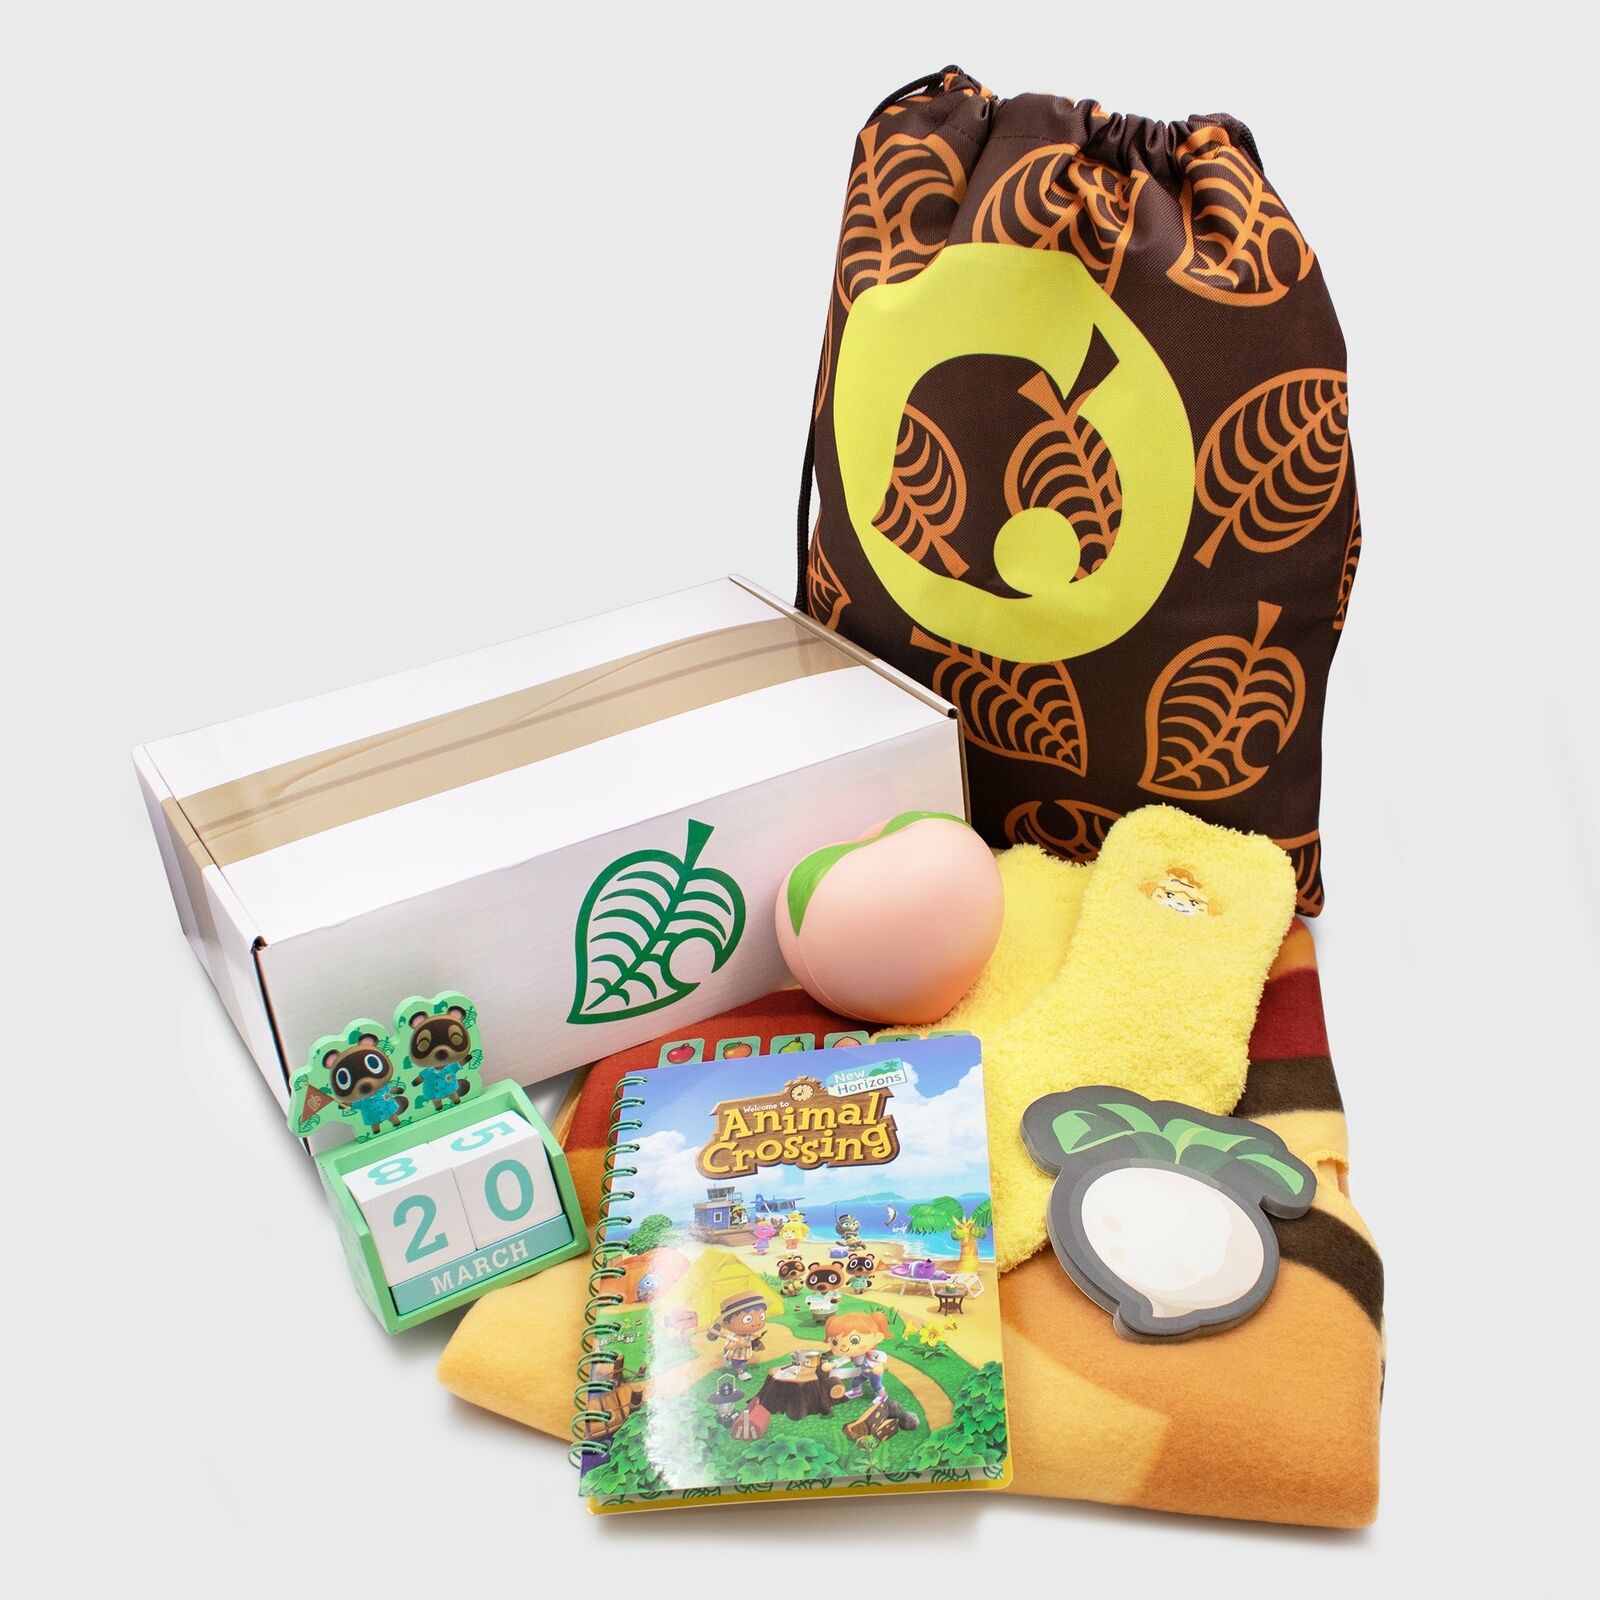 Animal Crossing: New Horizons Collector's Box